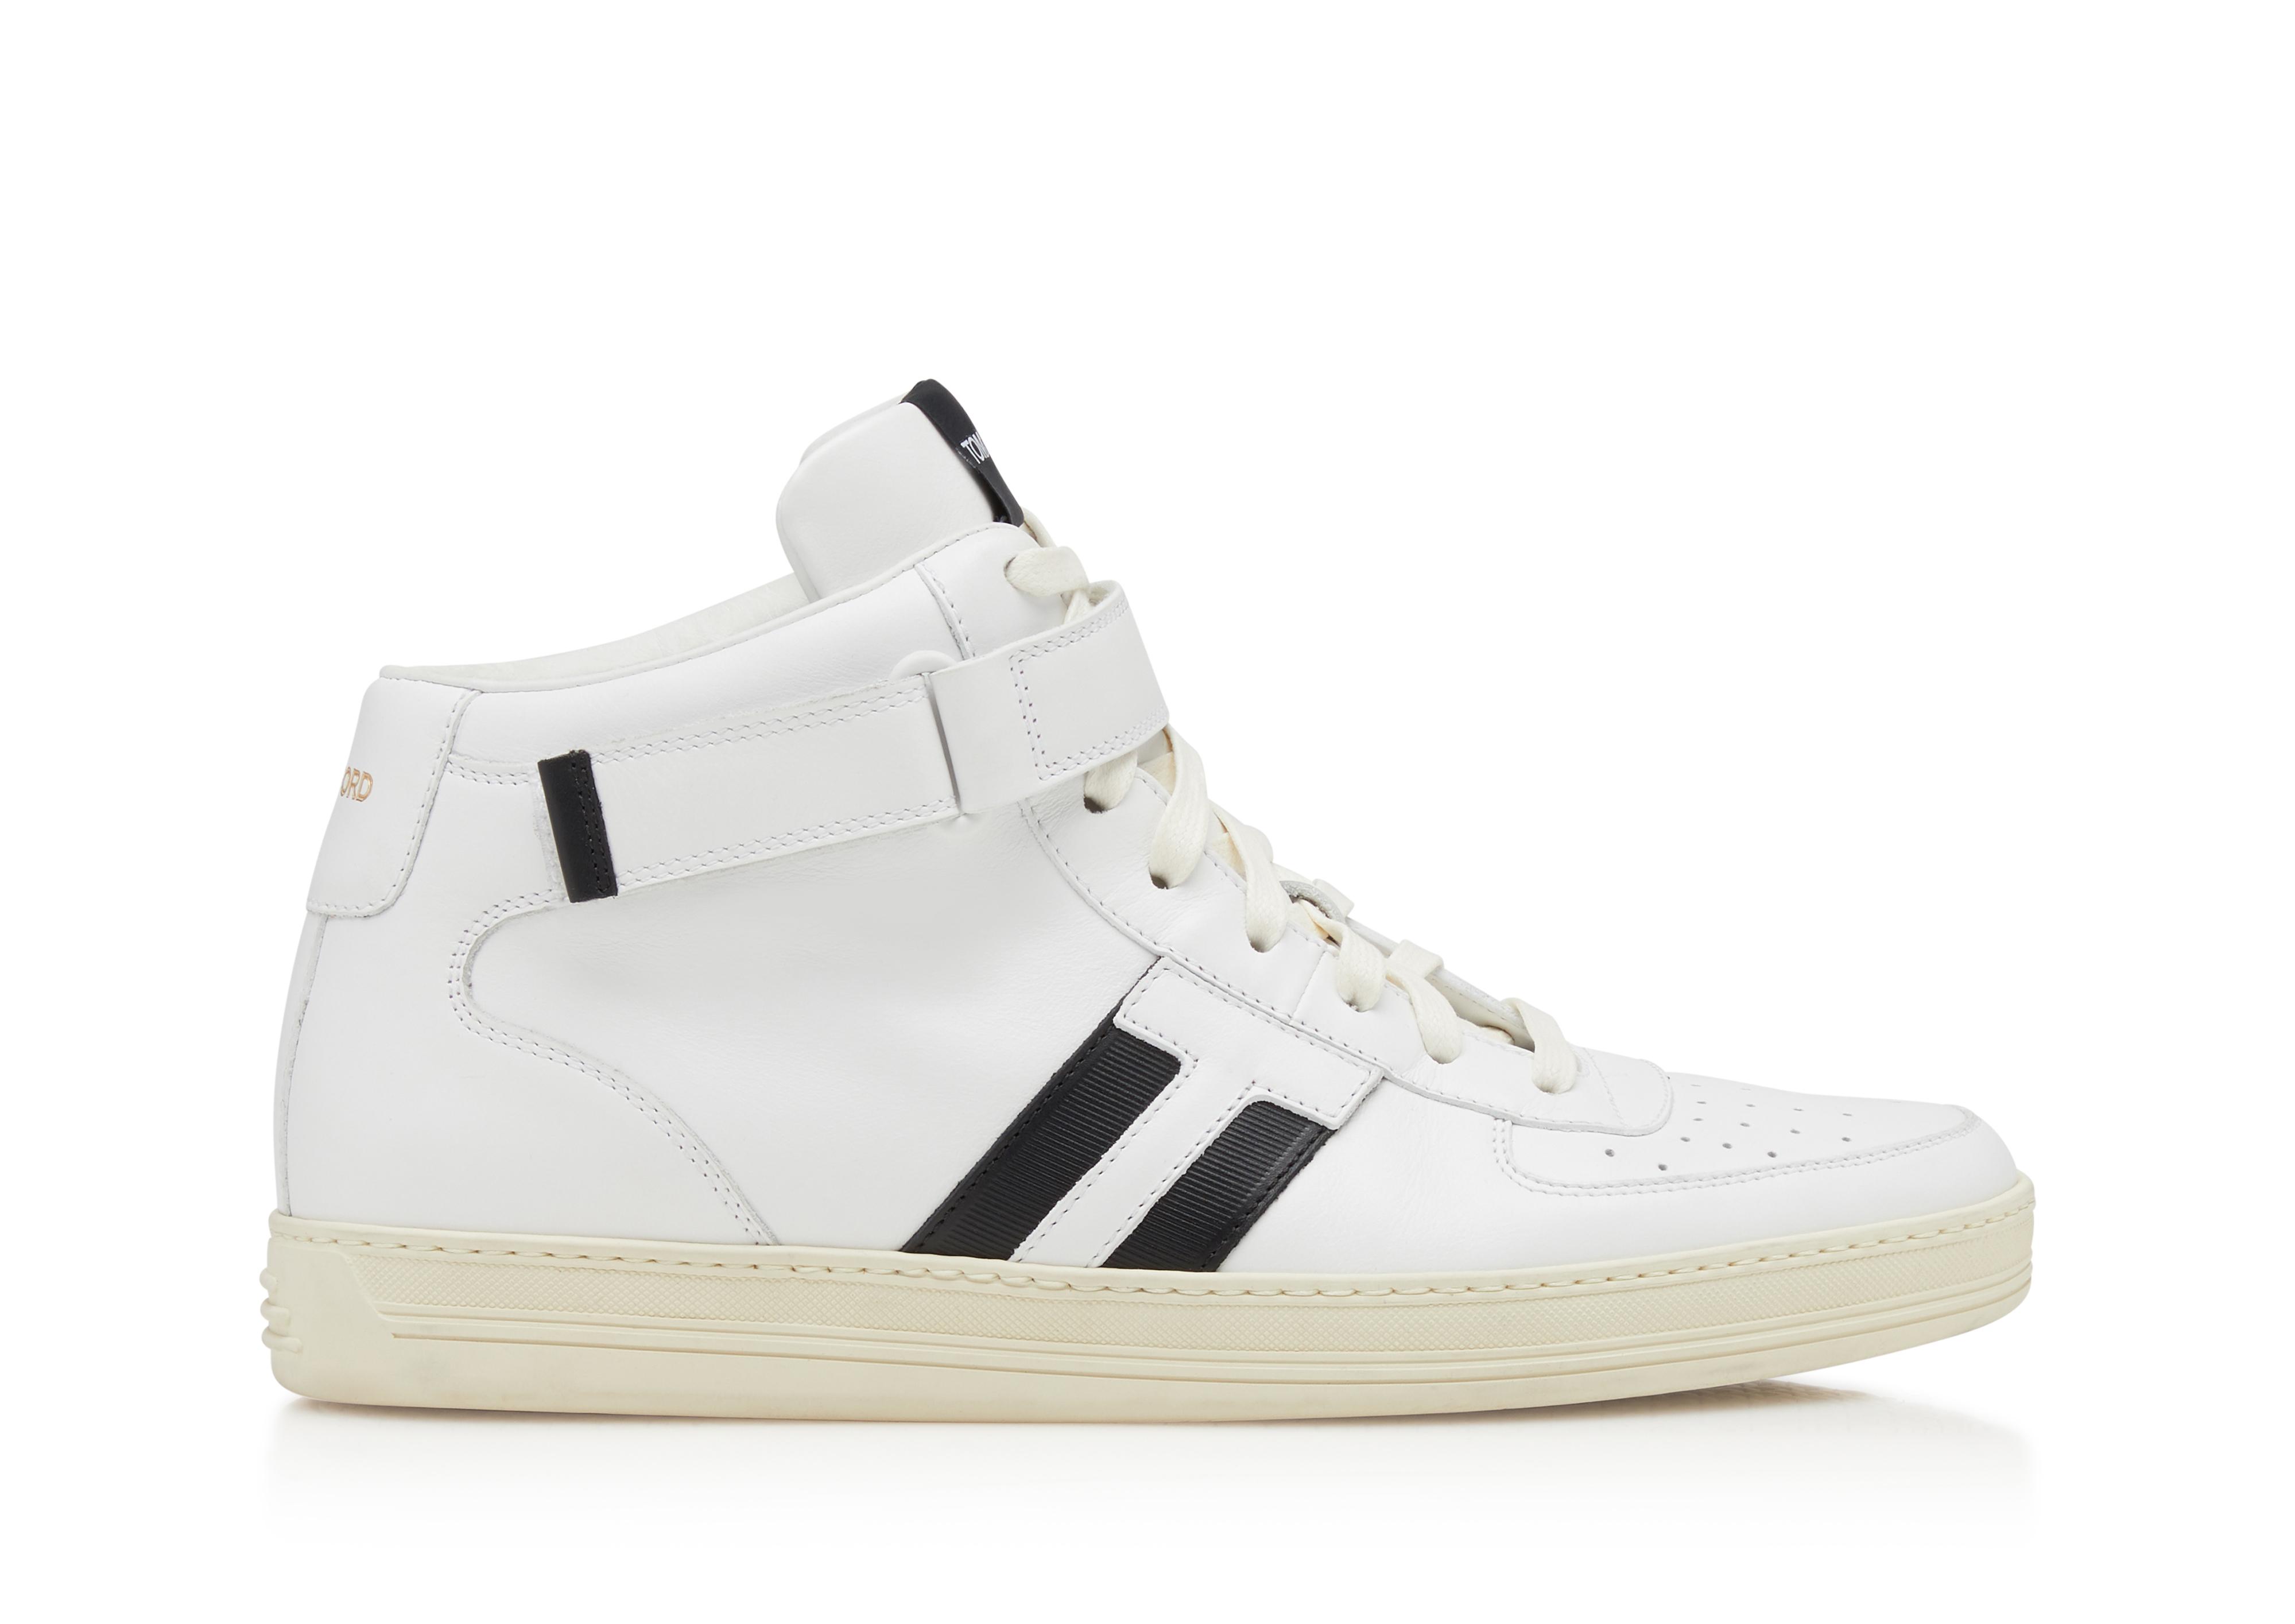 tom ford radcliffe sneakers